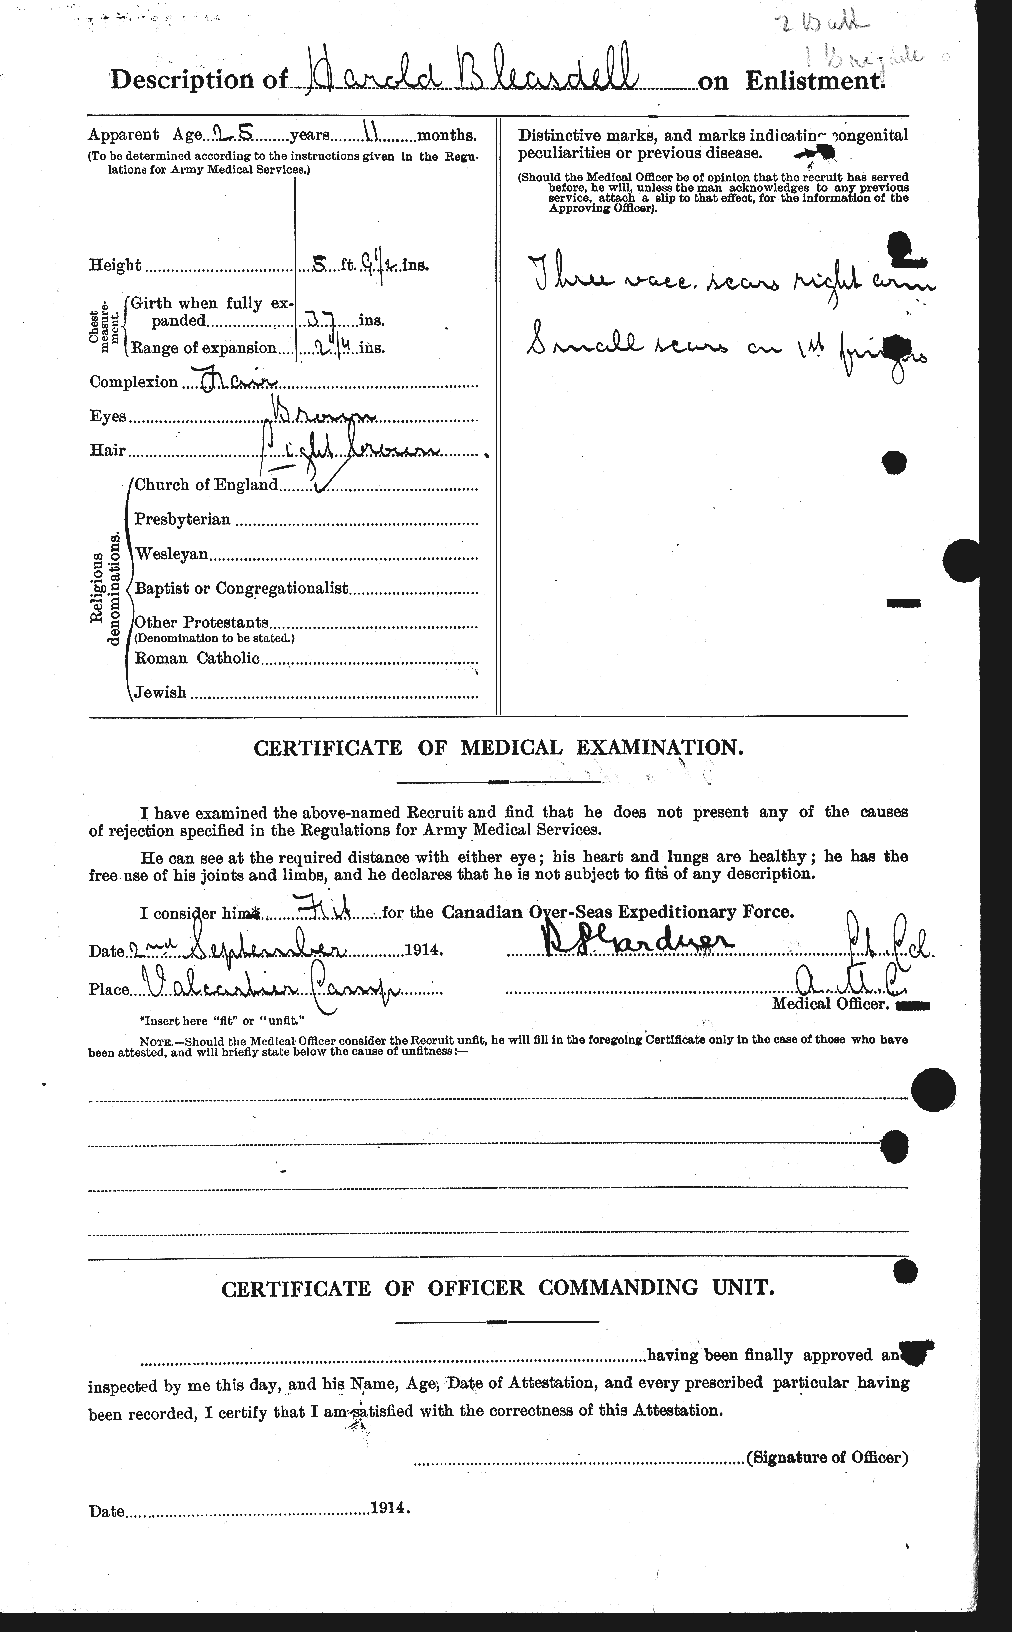 Personnel Records of the First World War - CEF 247919b